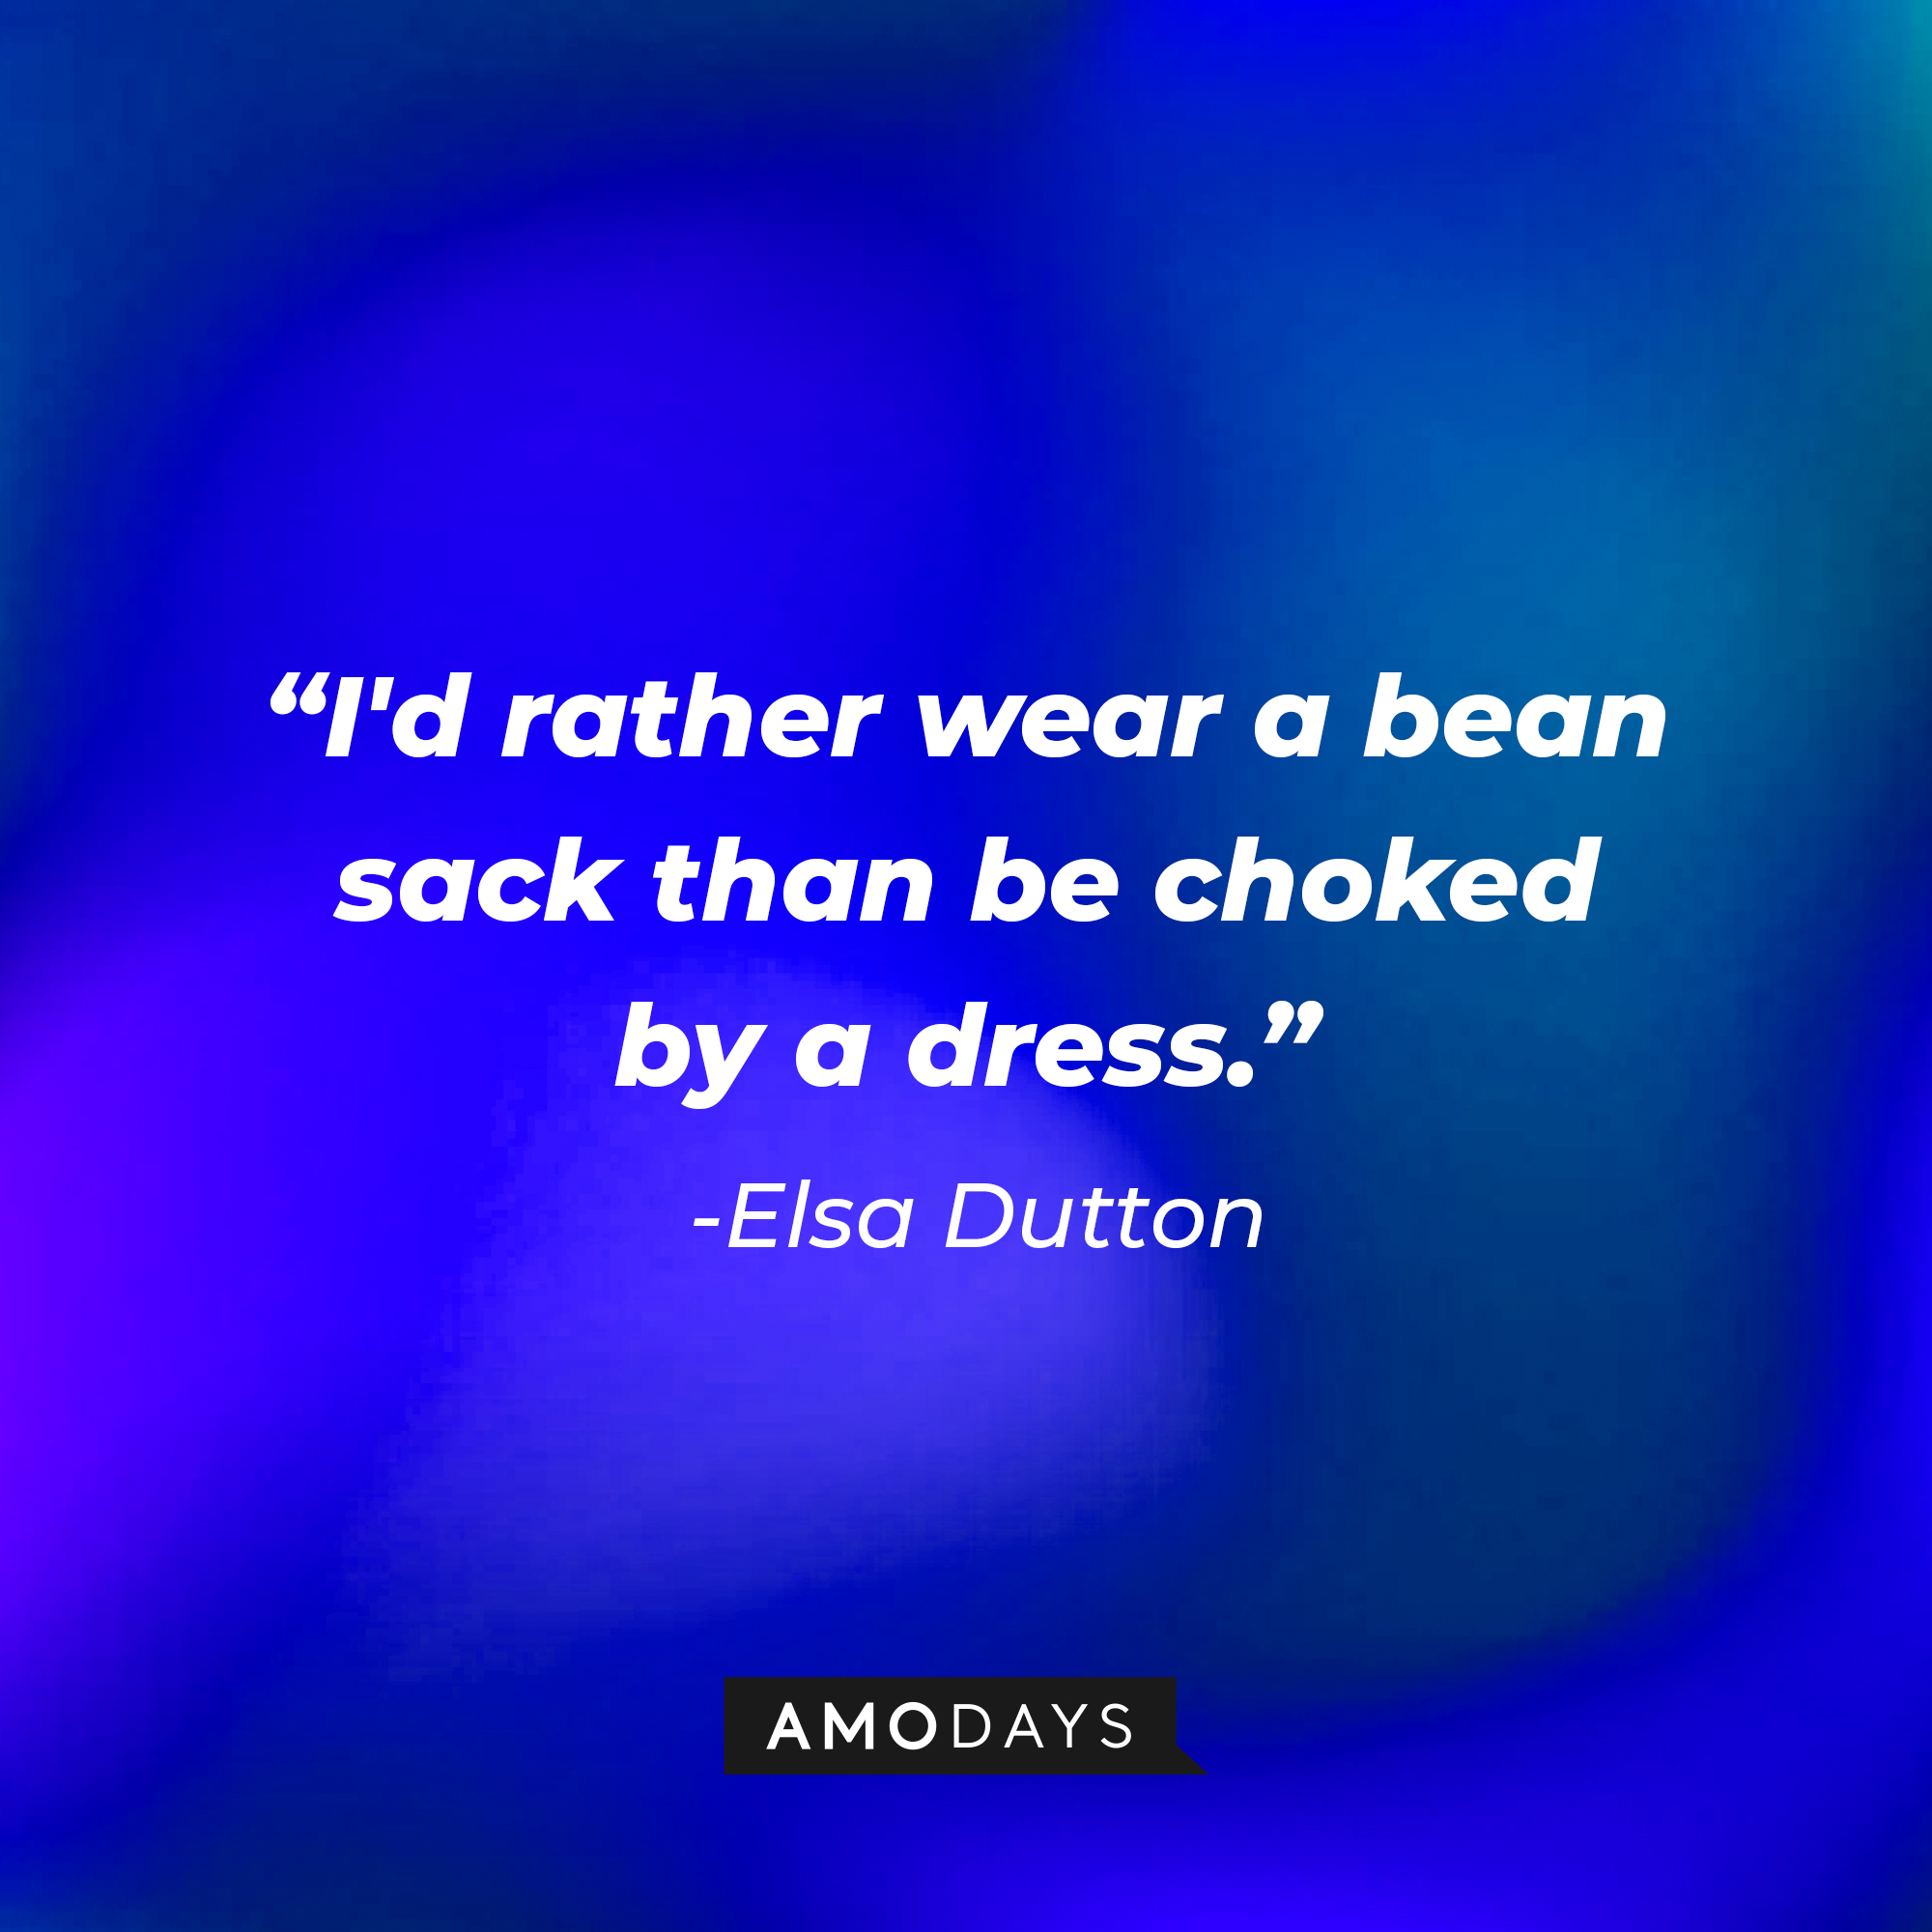 Elsa Dutton's quote: "I'd rather wear a bean sack than be choked by a dress." | Source: AmoDays